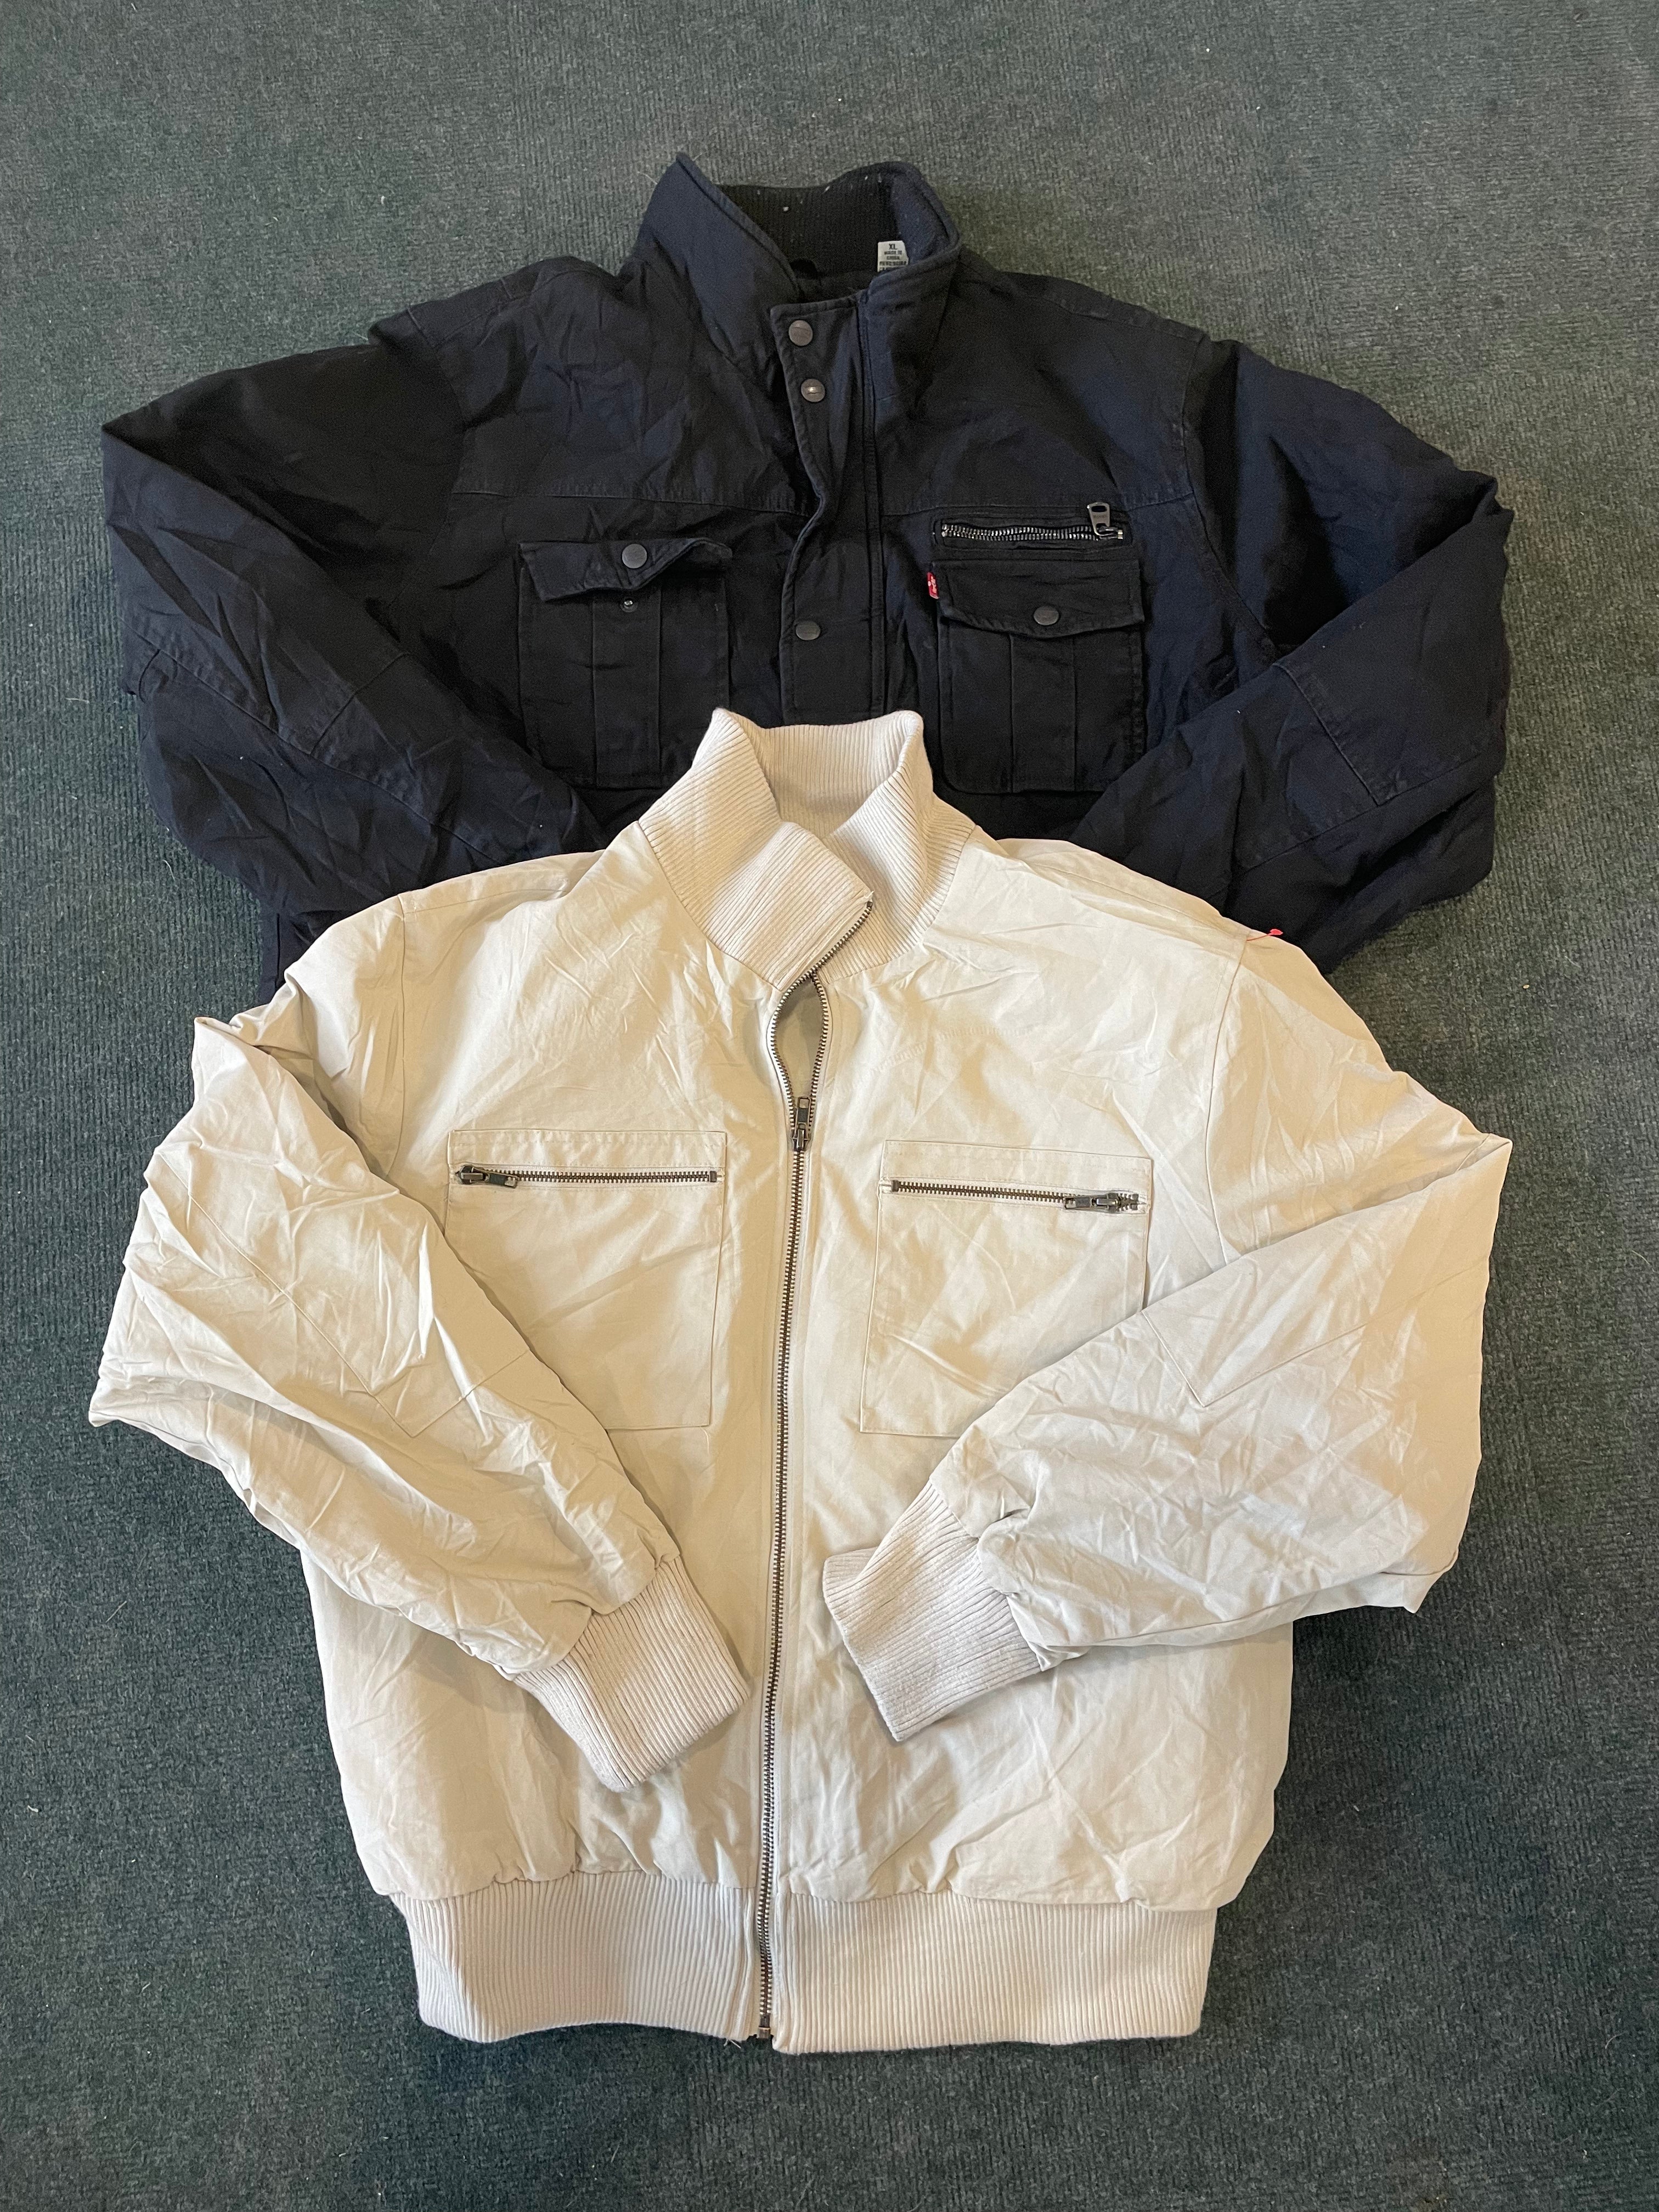 45kg Unsorted Mix Heavy Jackets Direct from the Factory